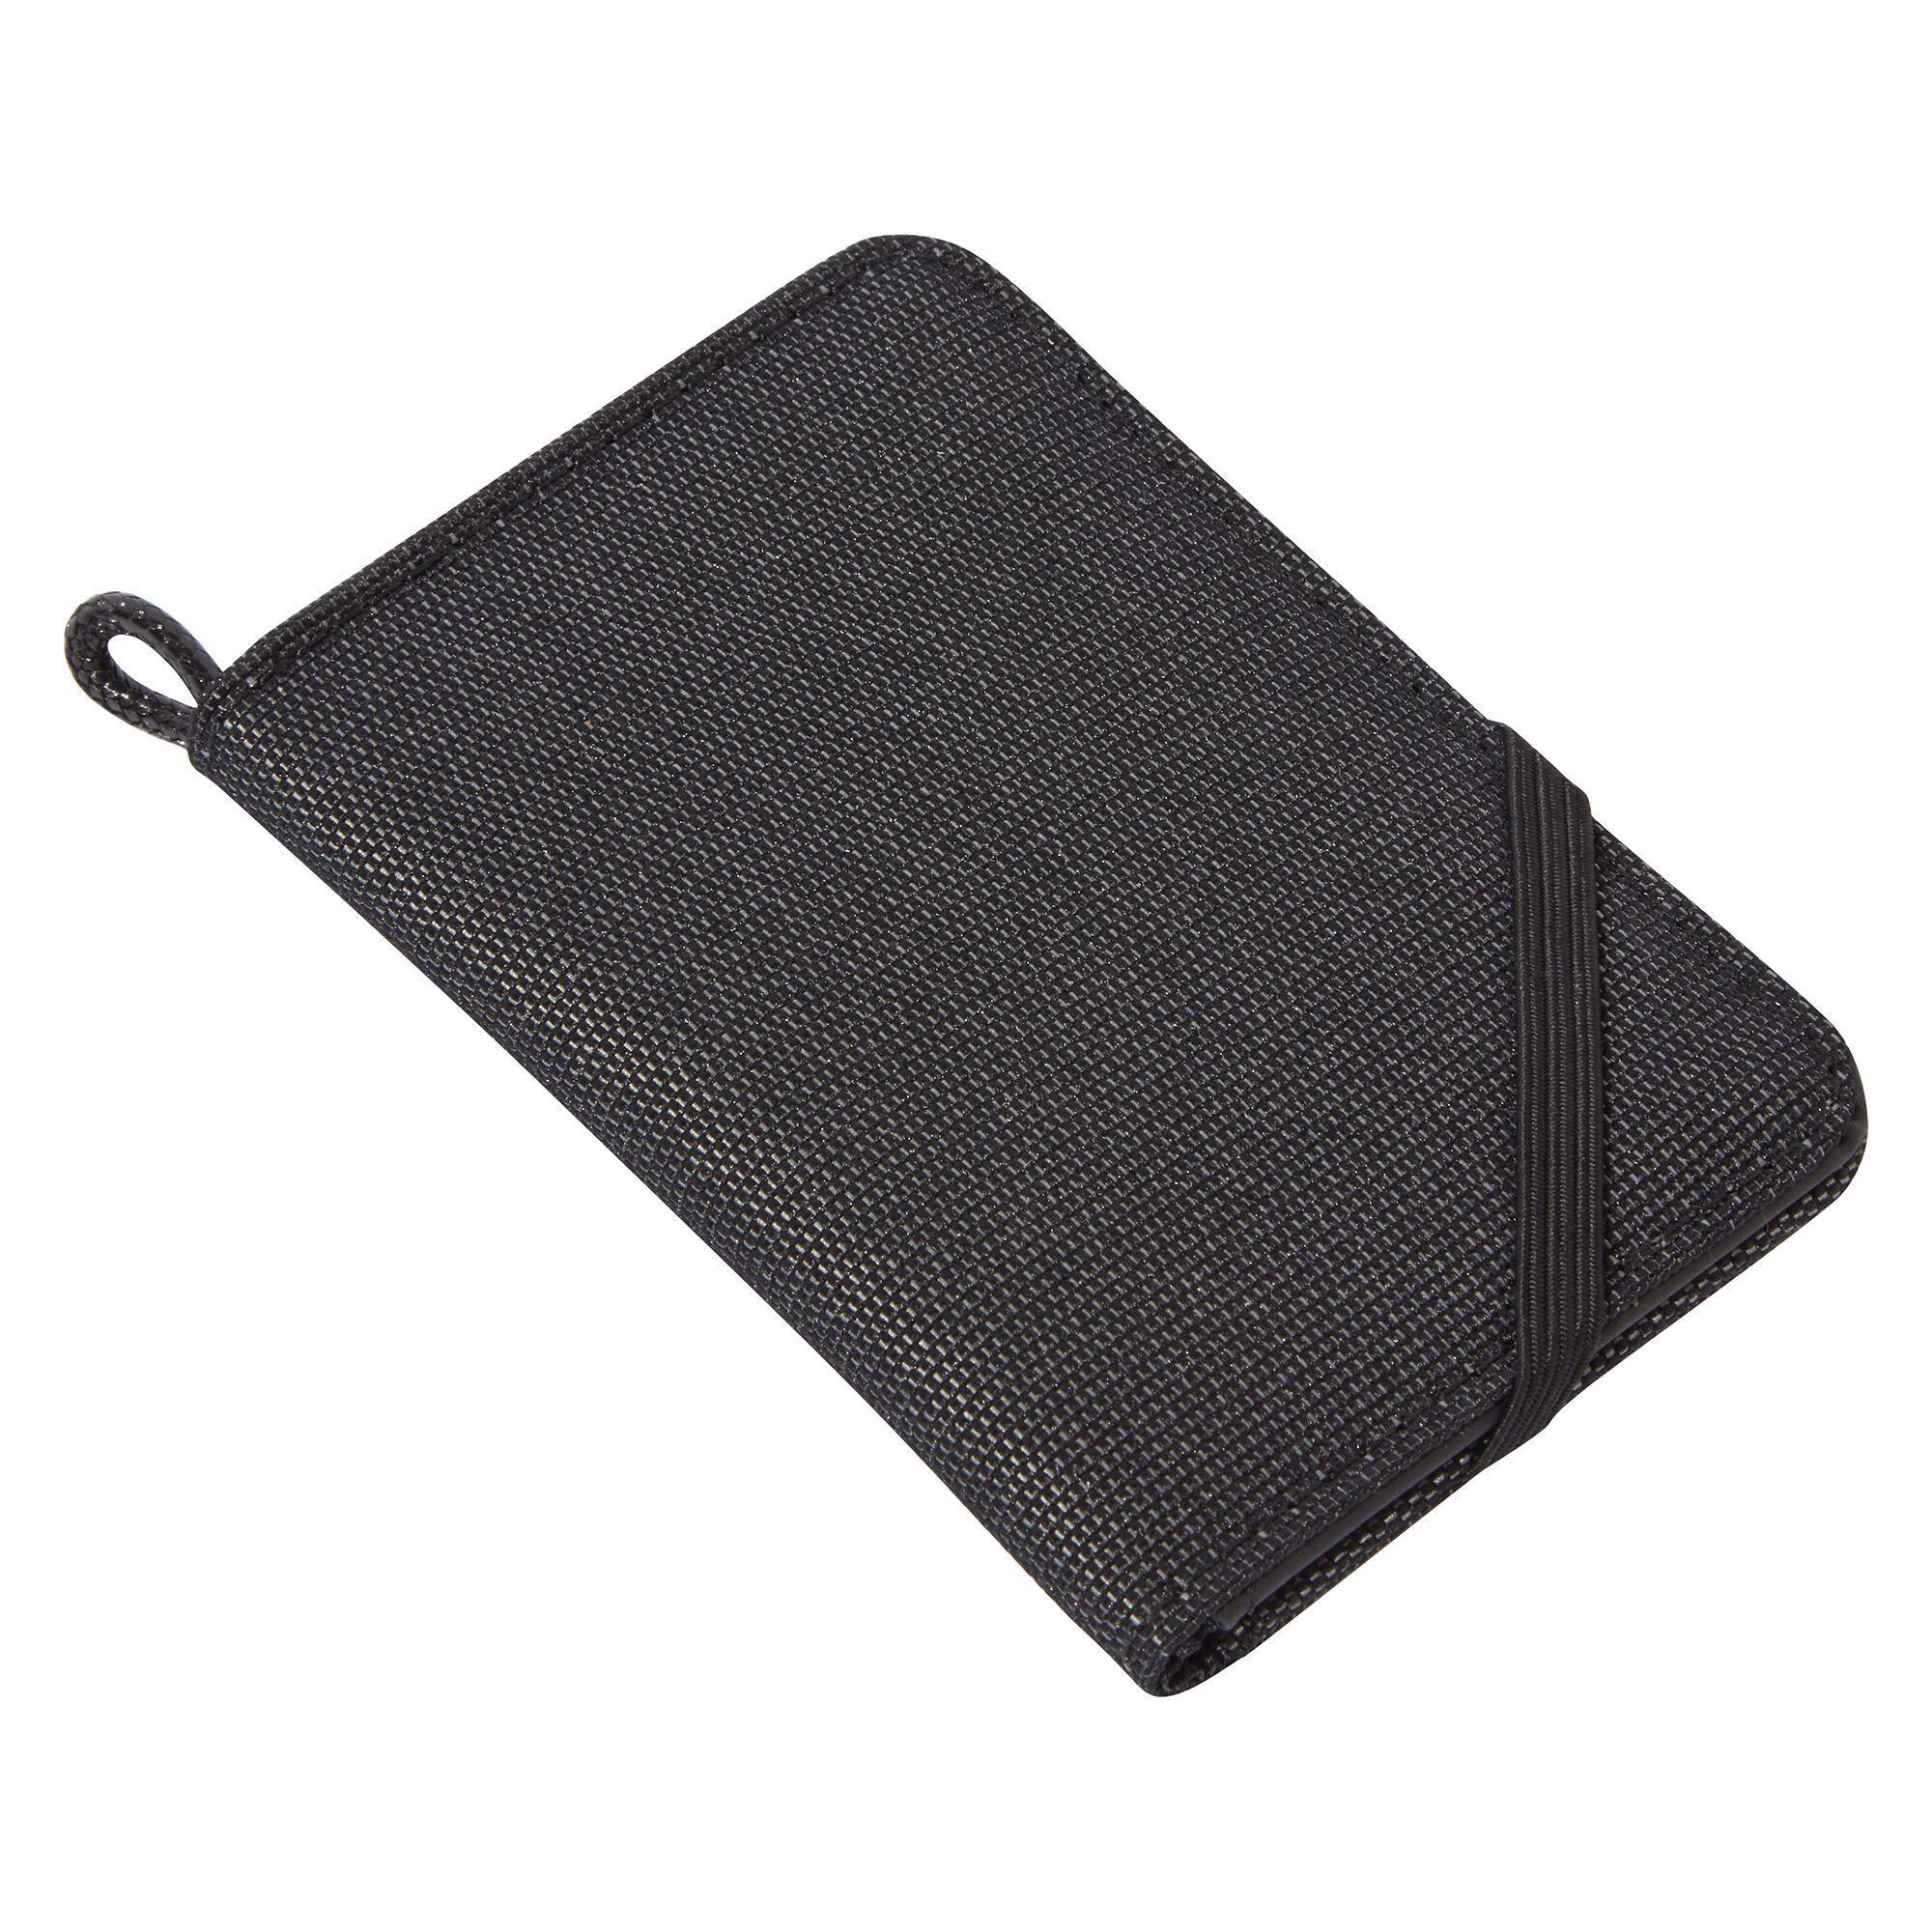 Craghoppers Unisex Adults Card Wallet (Black) (One Size)